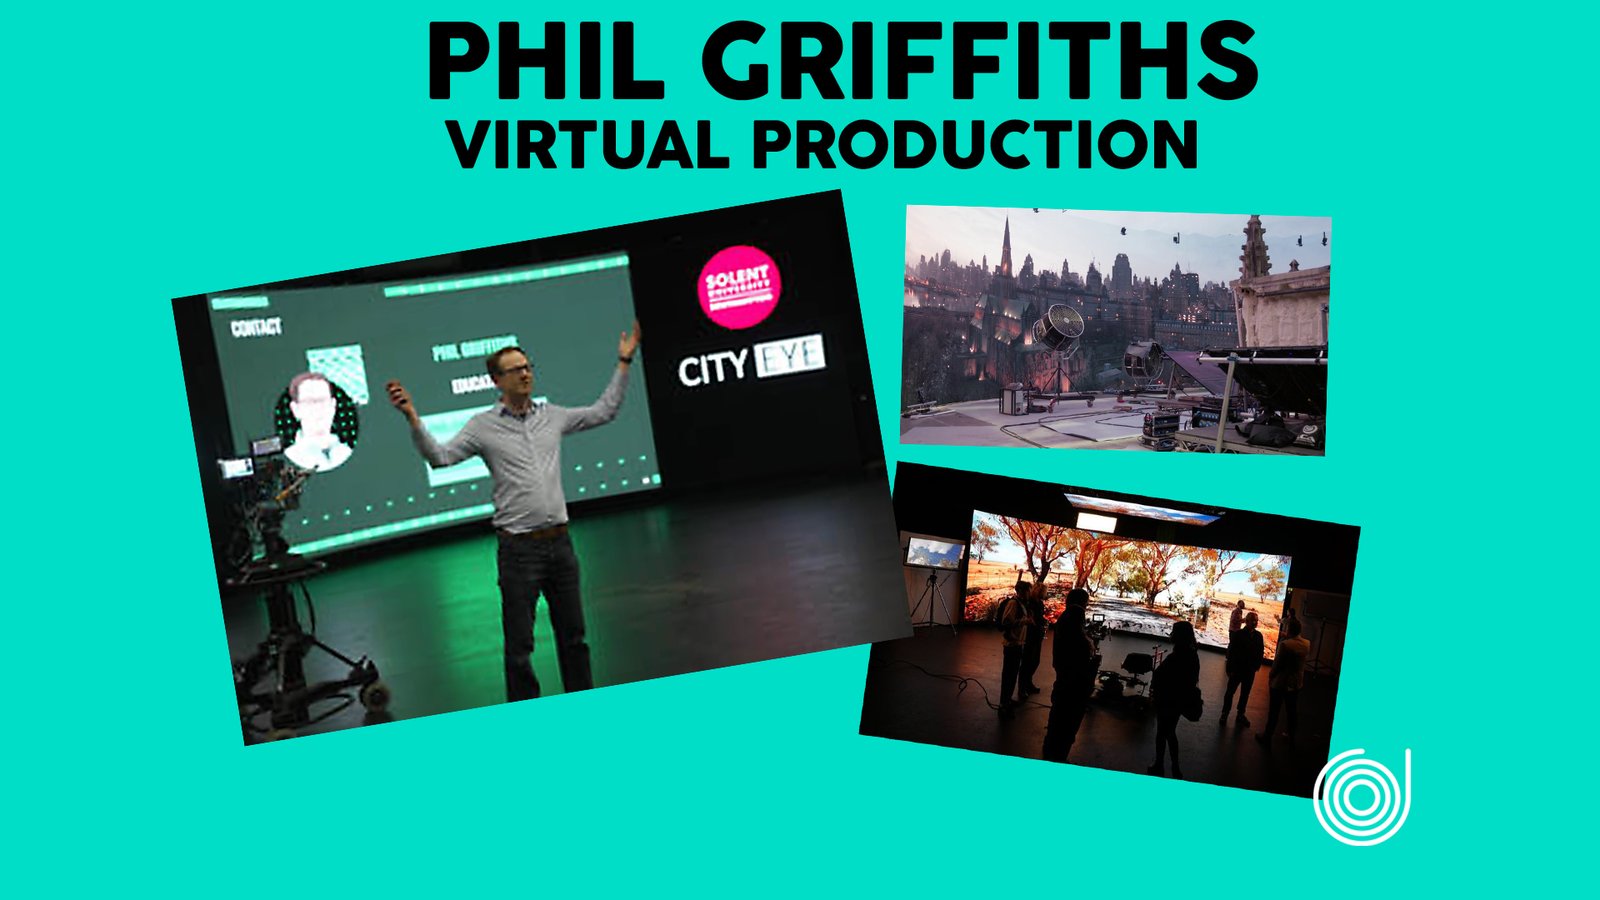 What is Virtual Production?